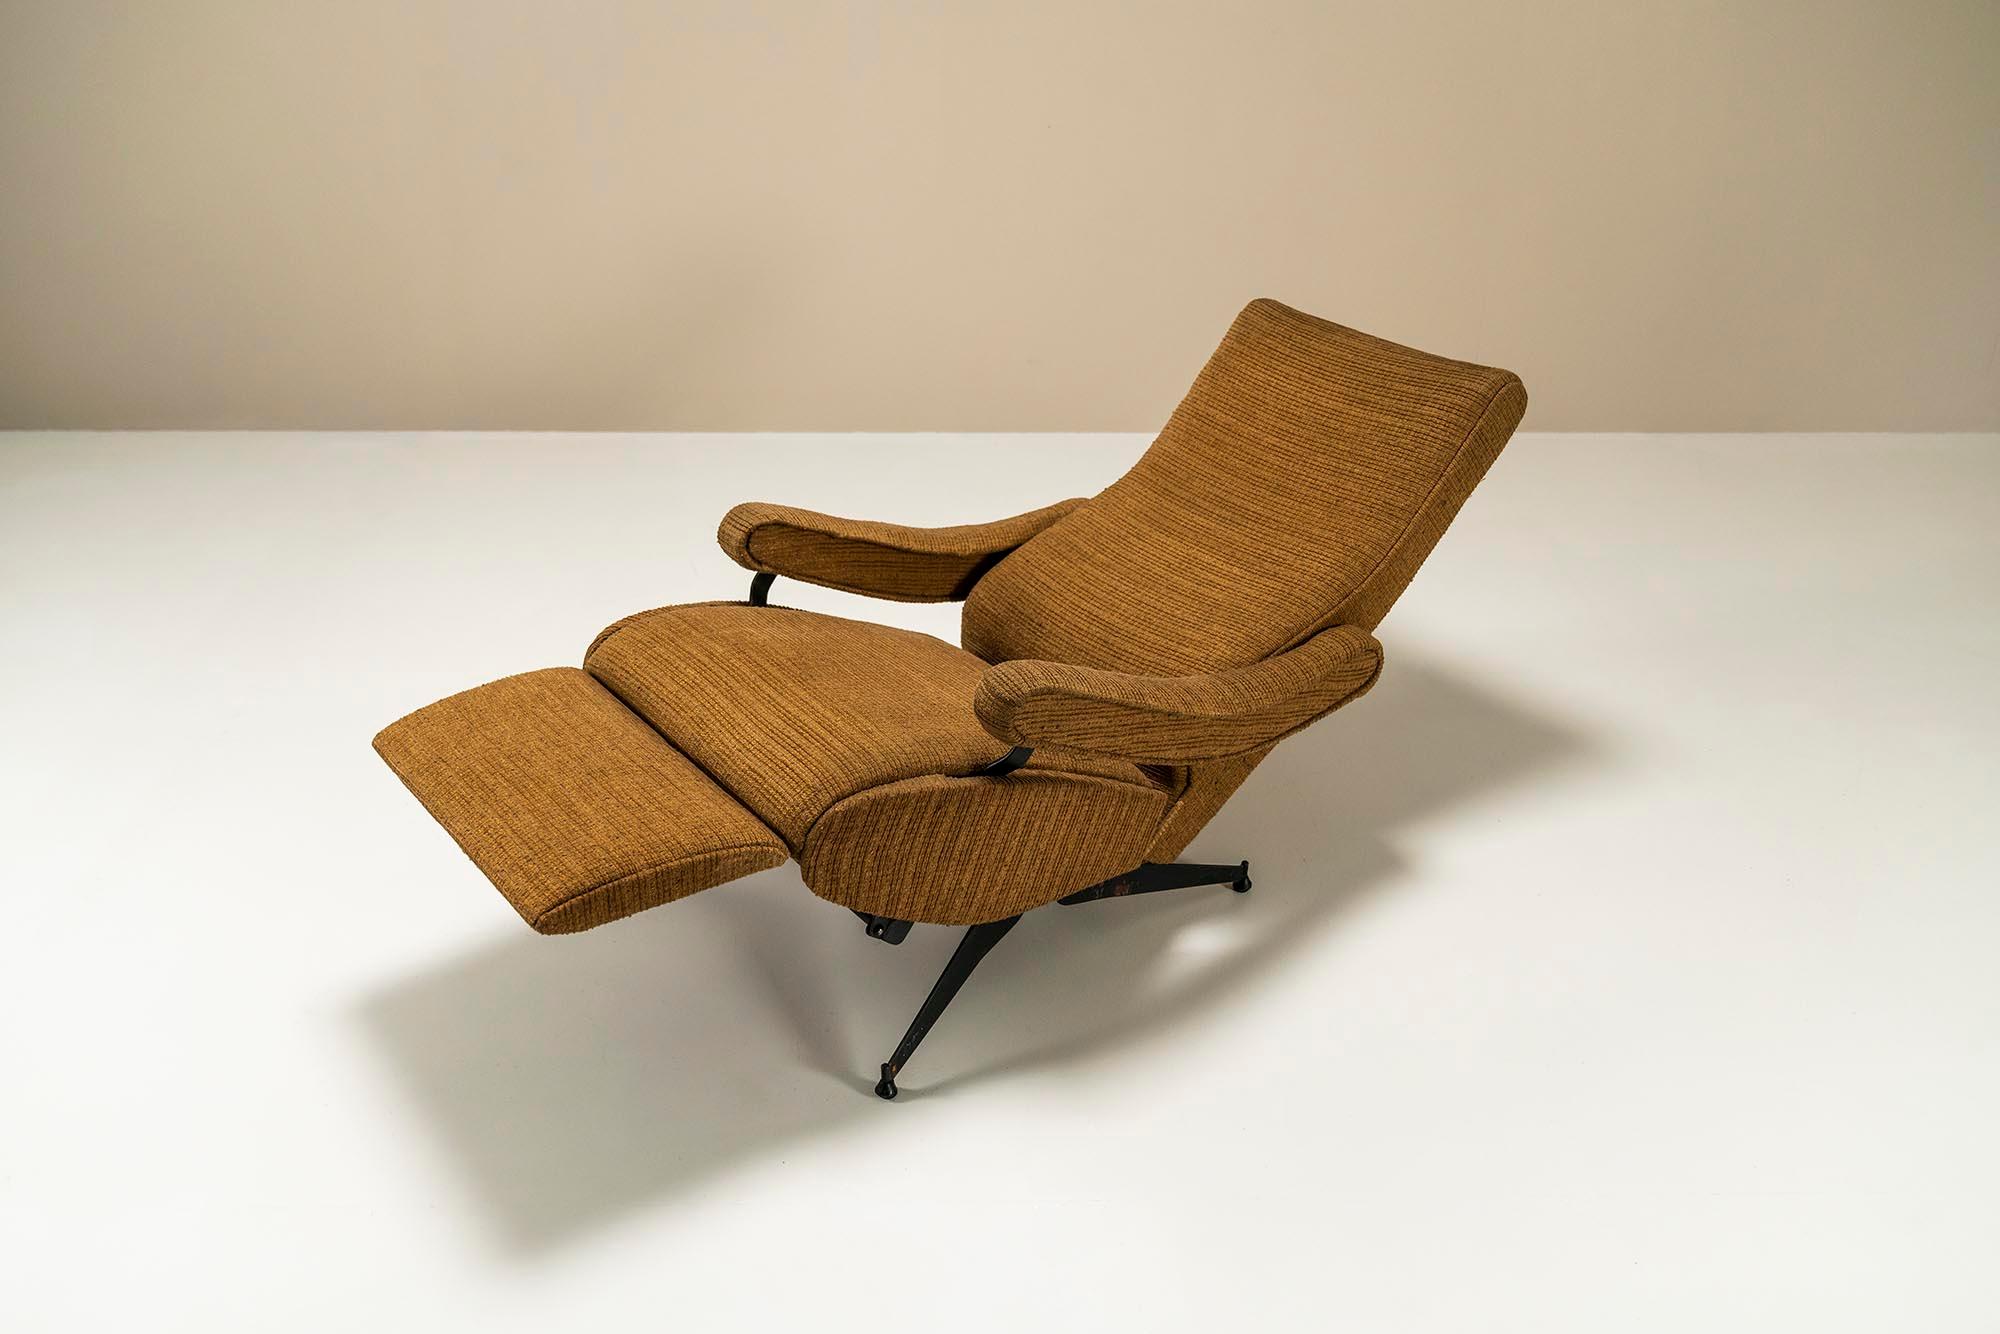 Reclining Armchair in Steel and Fabric by Nello Pini for Novarredo, Italy, 1959 For Sale 6